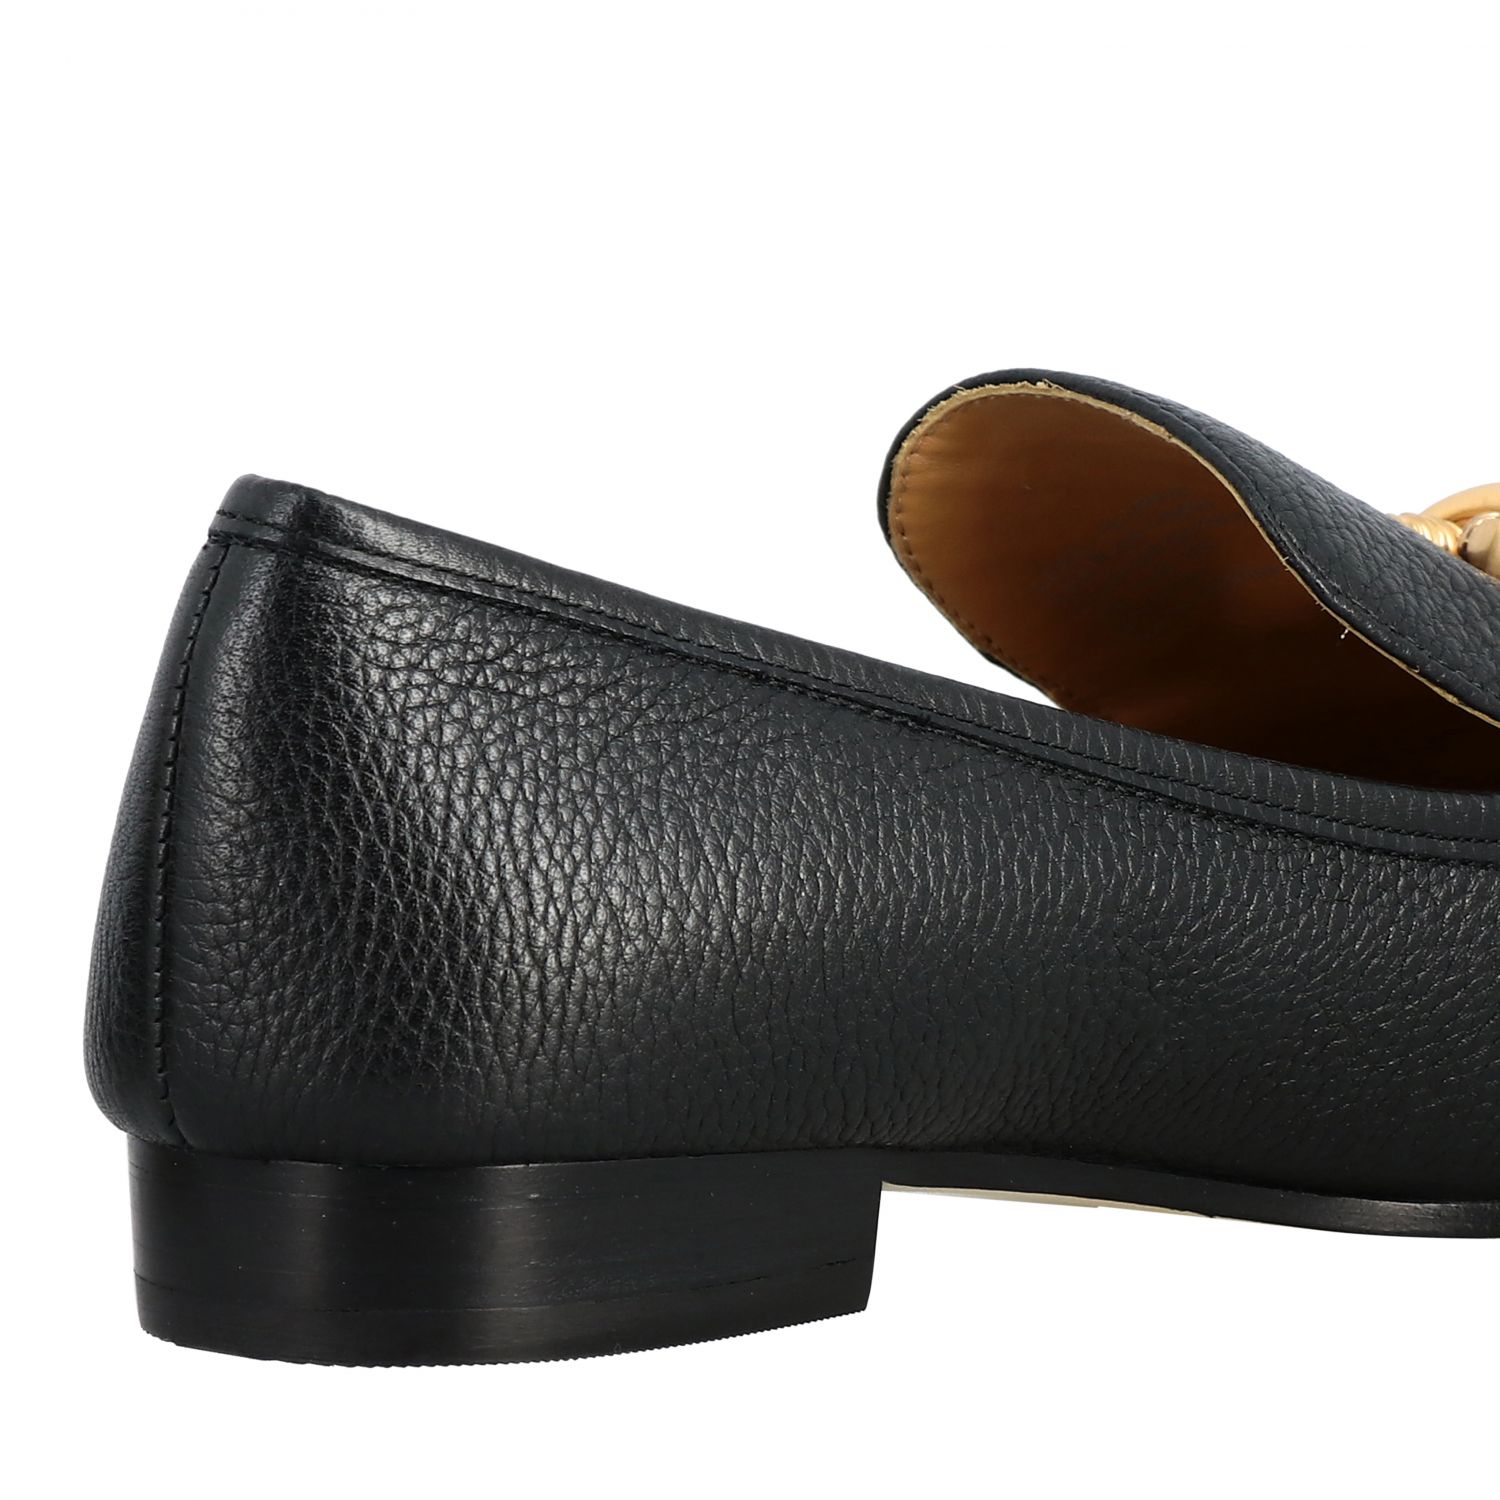 tory burch black loafers